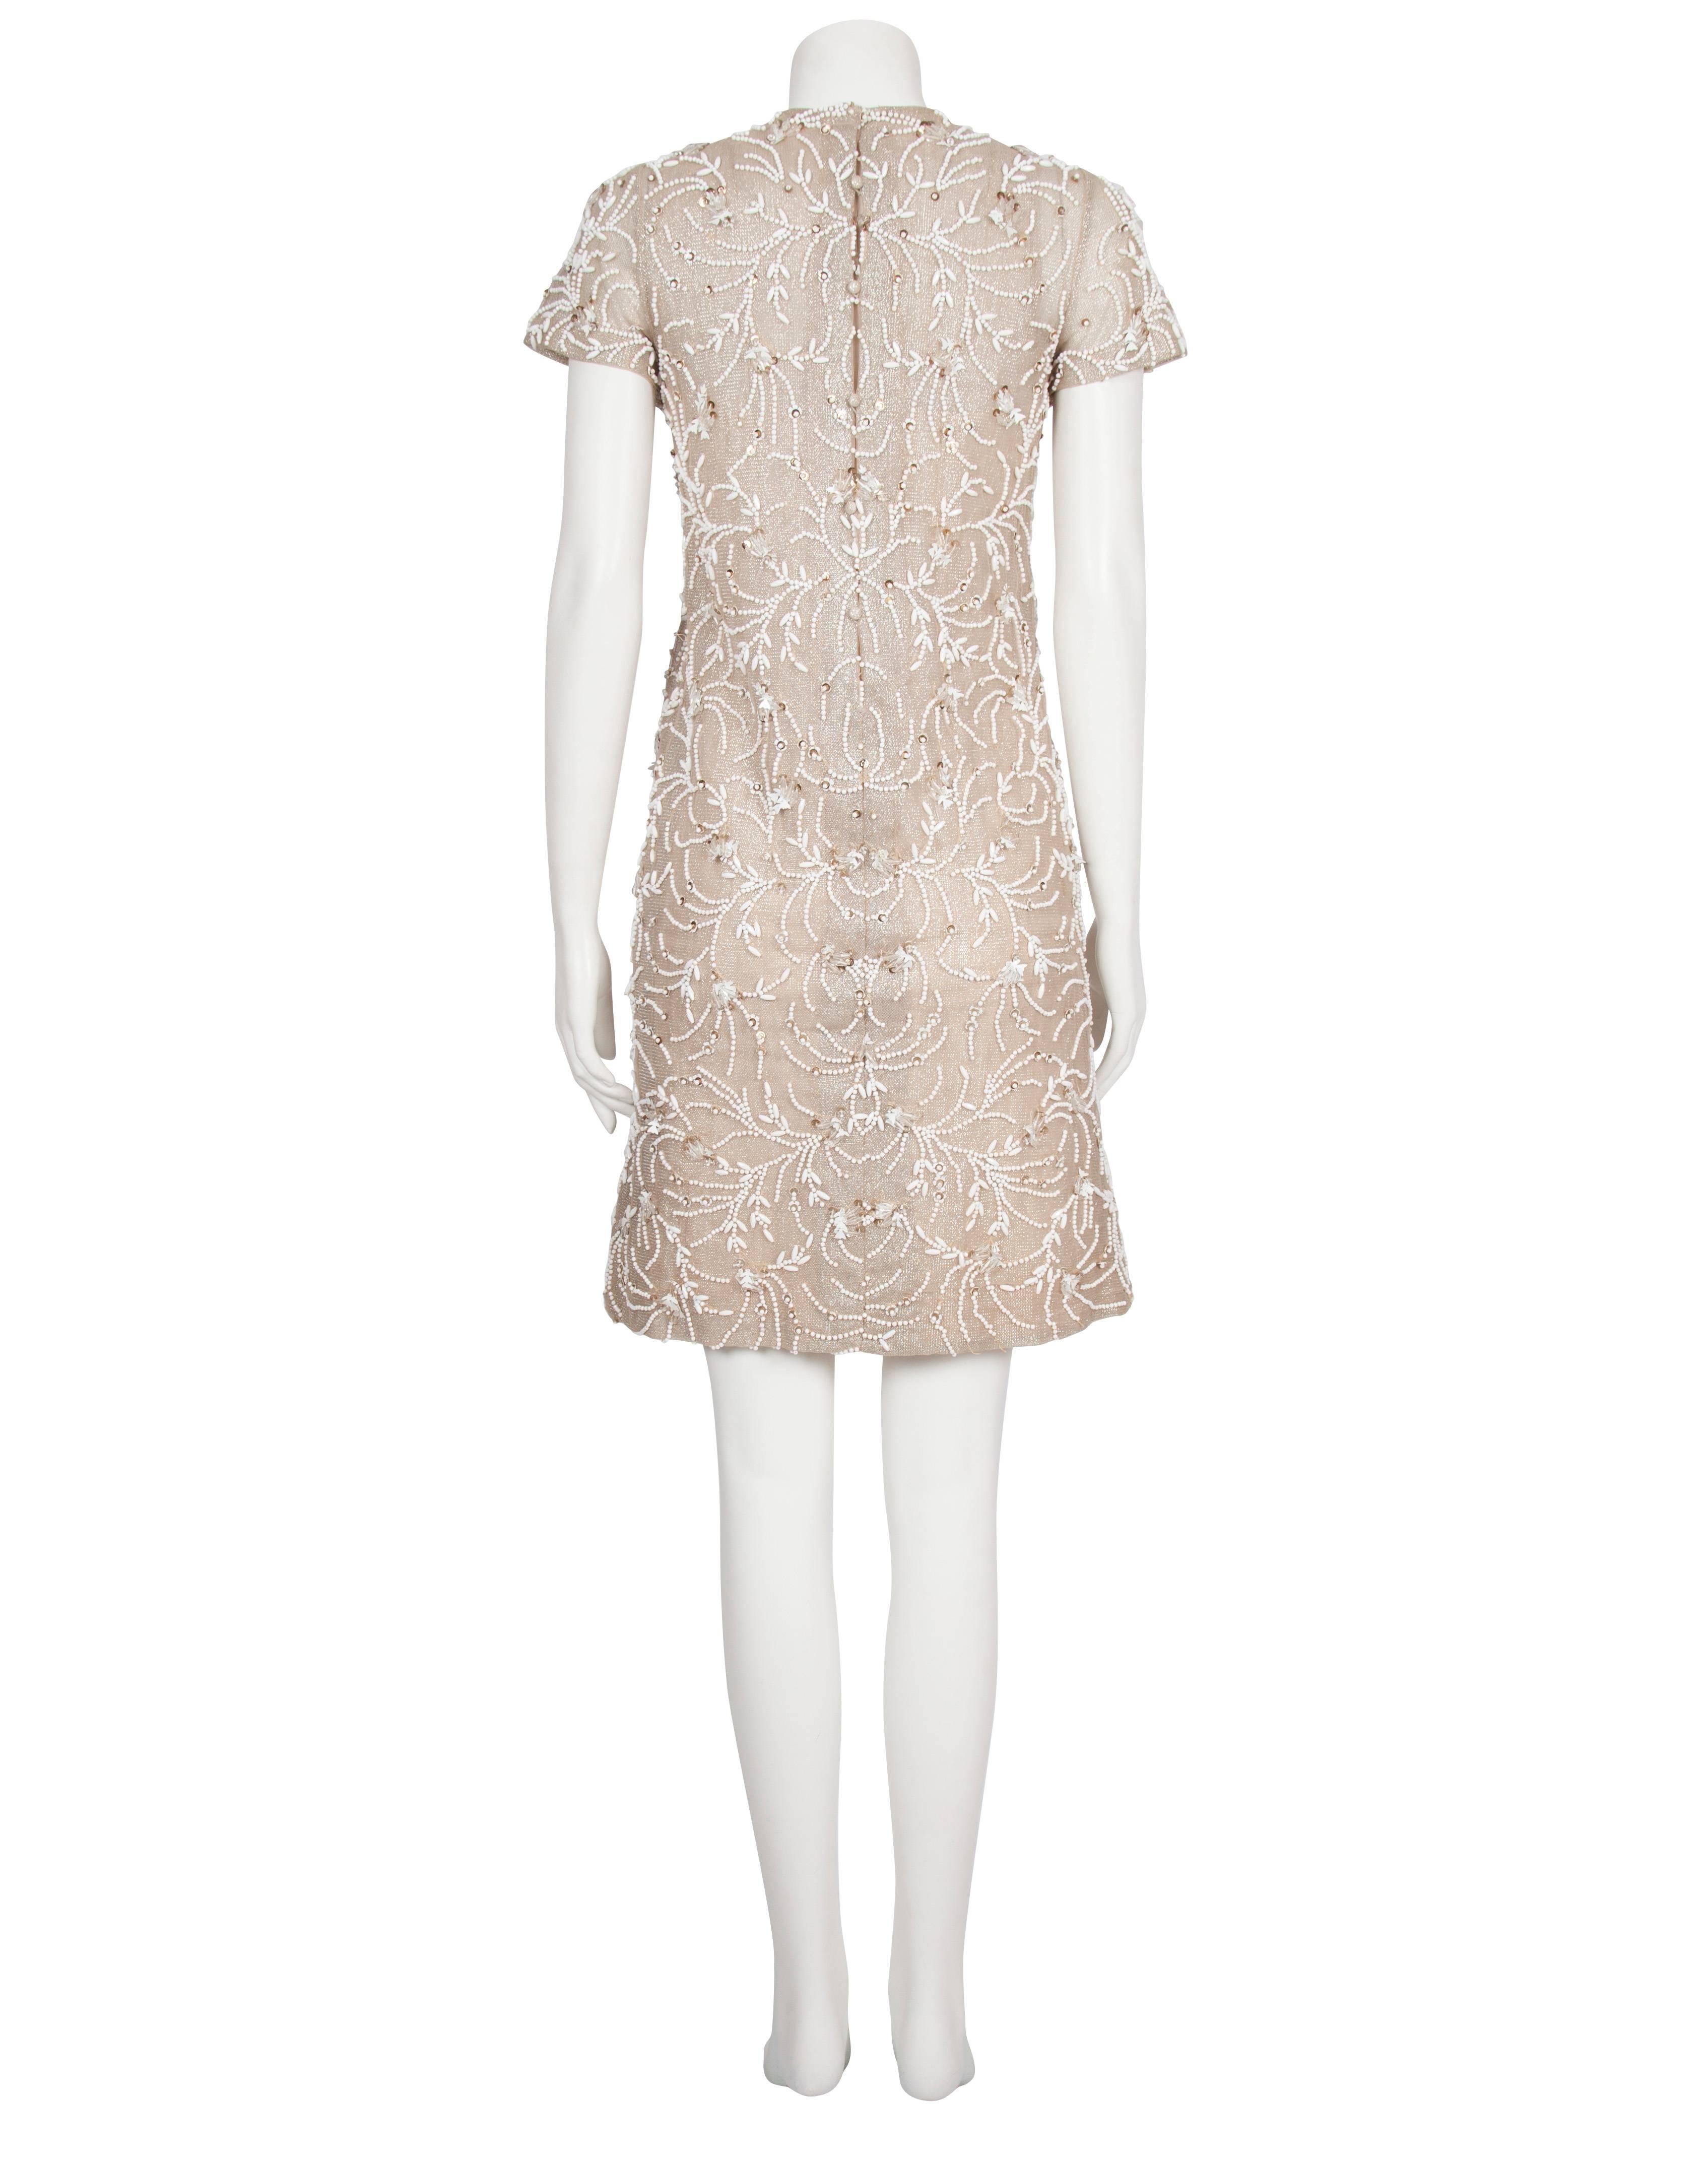 Women's 1960s Malcolm Starr Metallic and Ivory Beaded Shift Dress For Sale